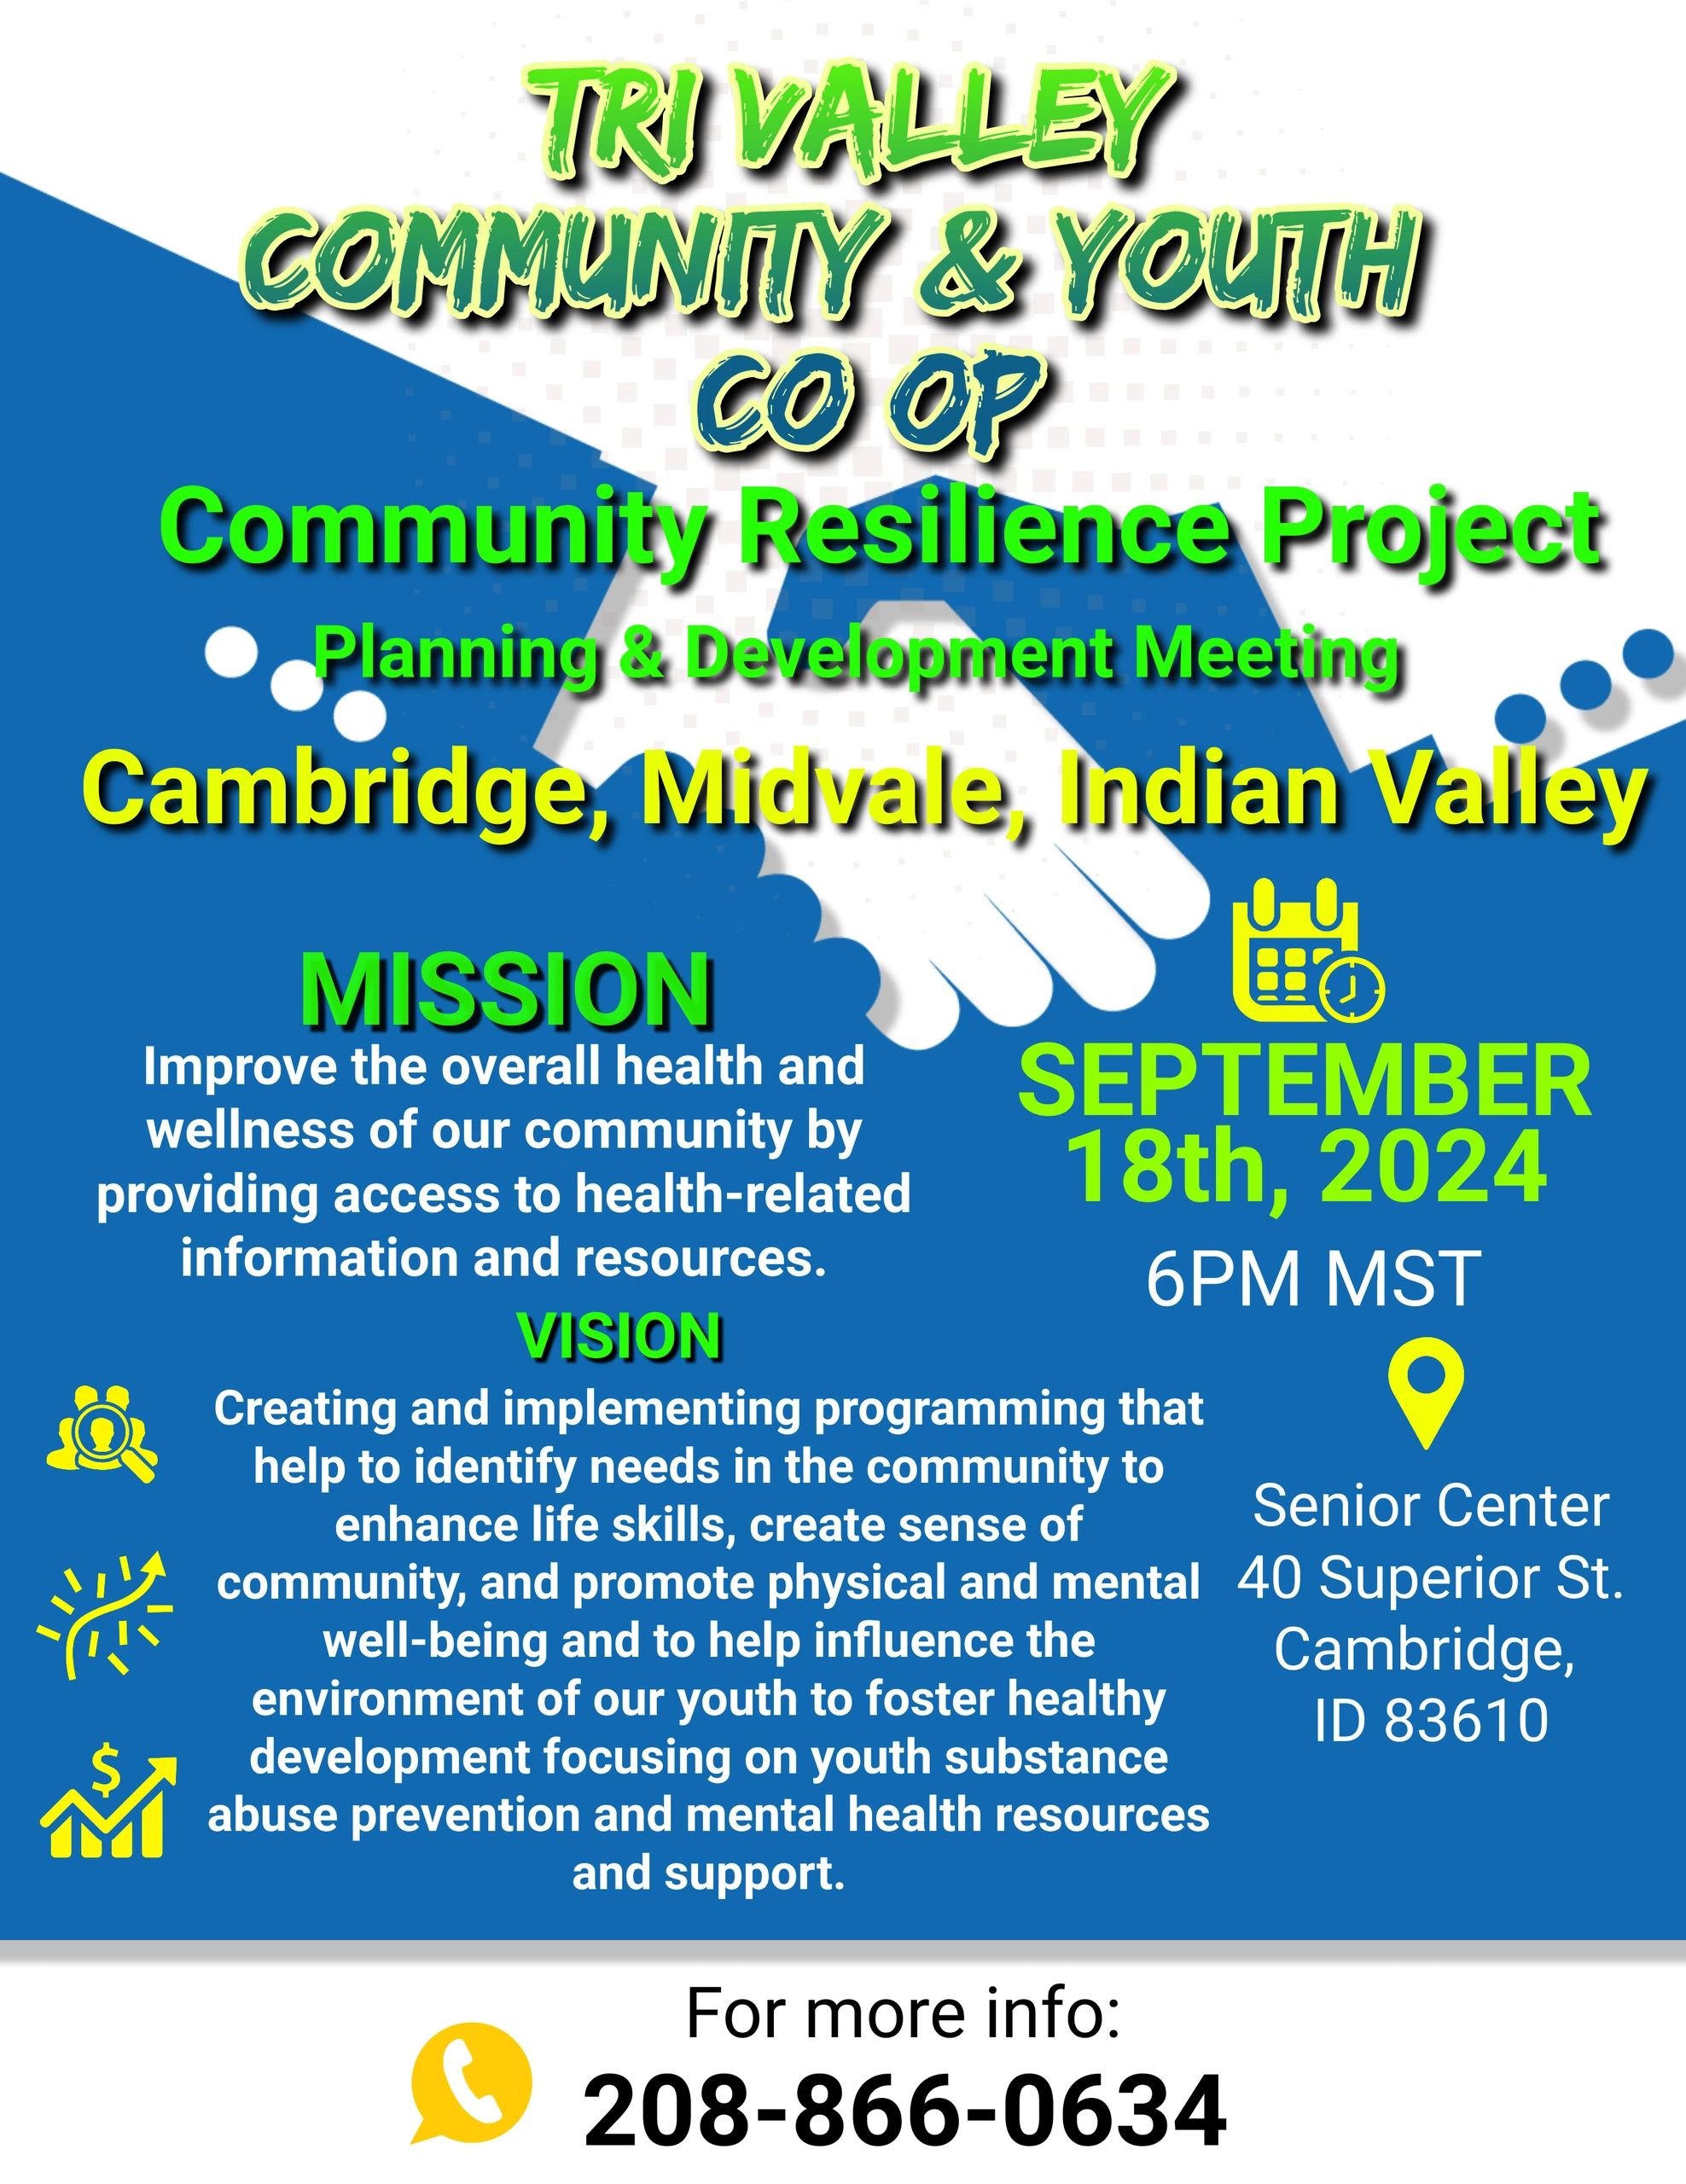 community meeting, September. community and youth coop meeting, Cambridge Idaho